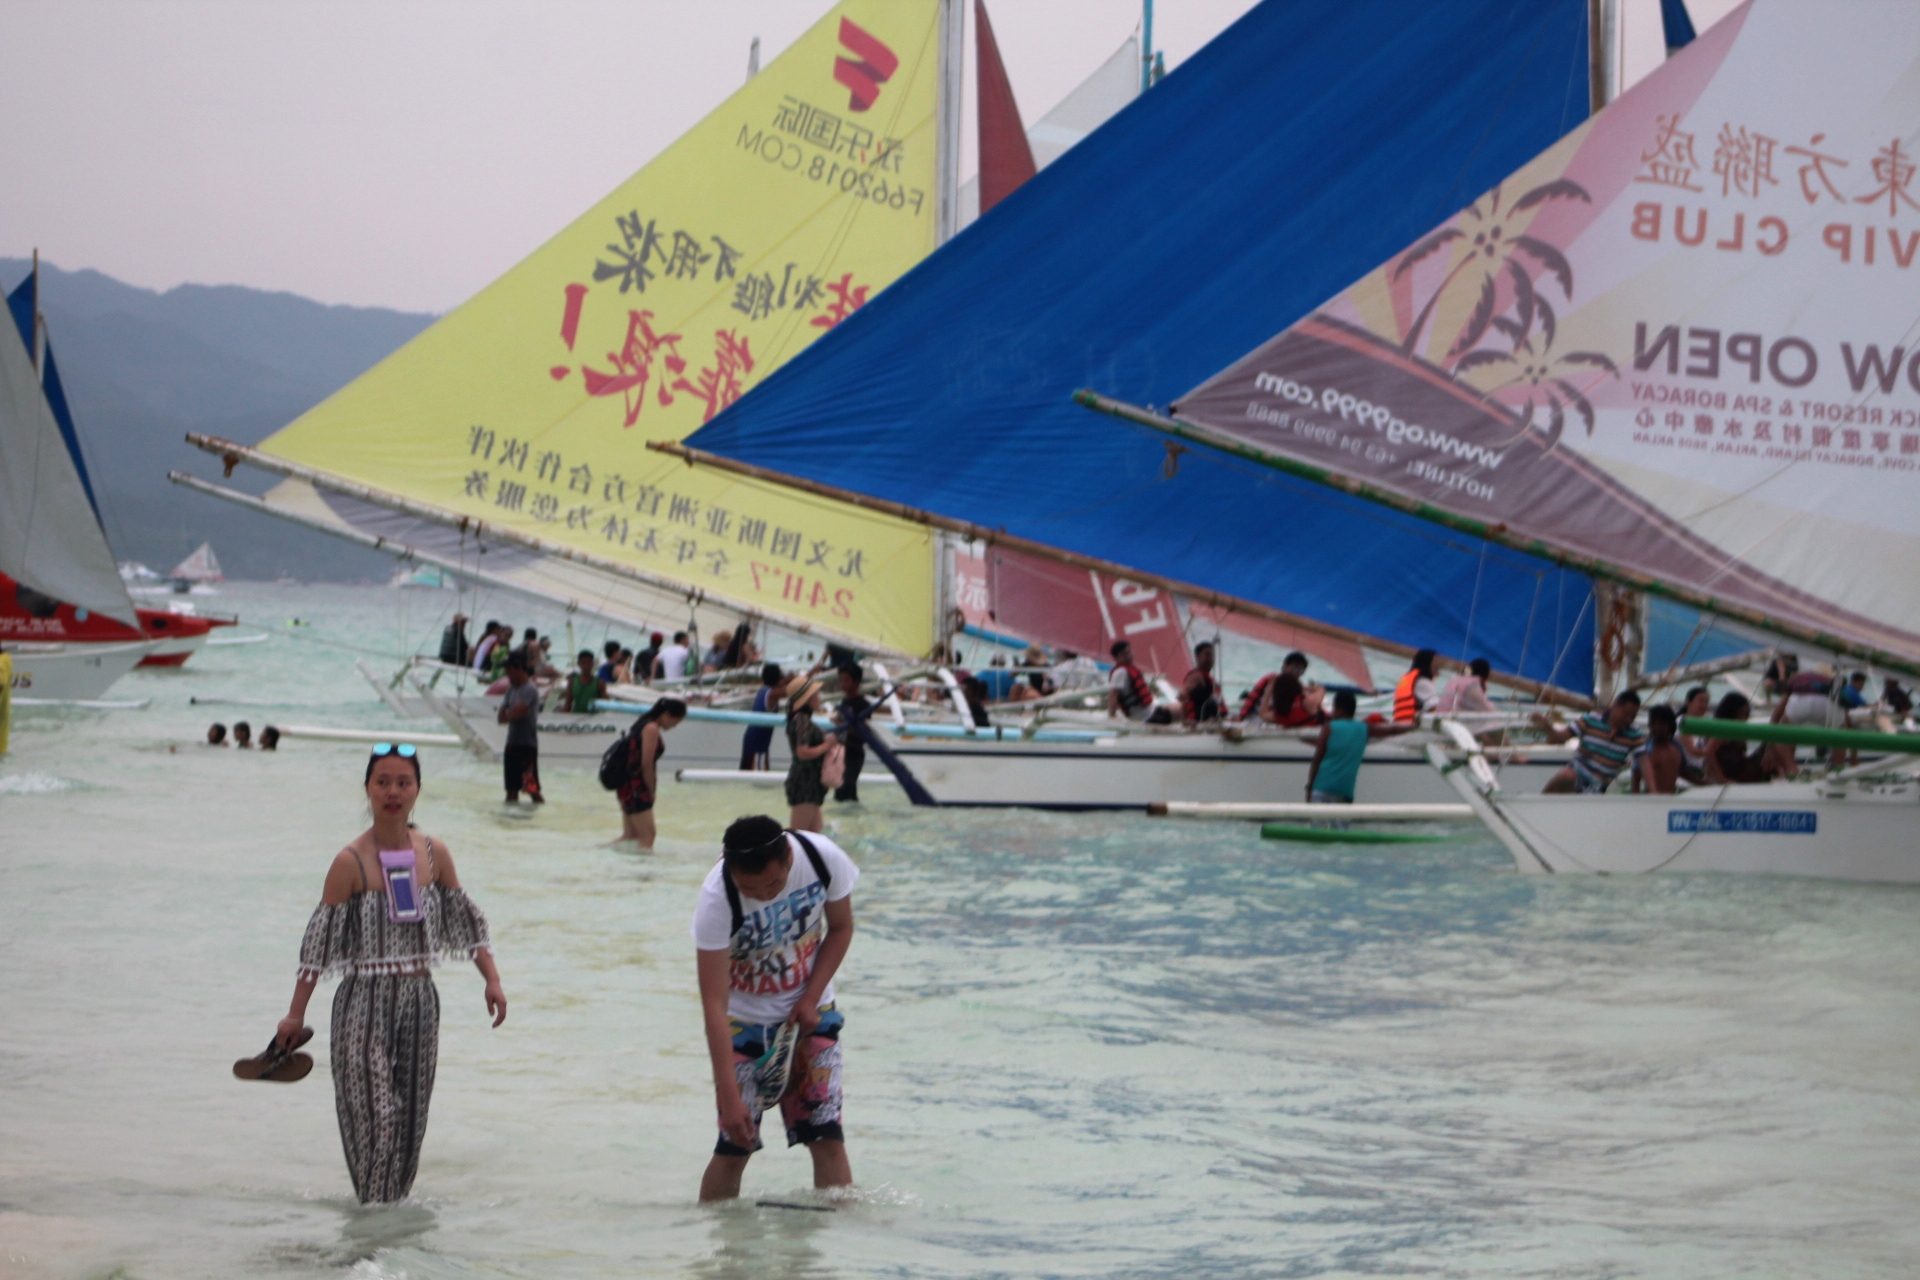 East Asians dominate Boracay’s foreign visitors